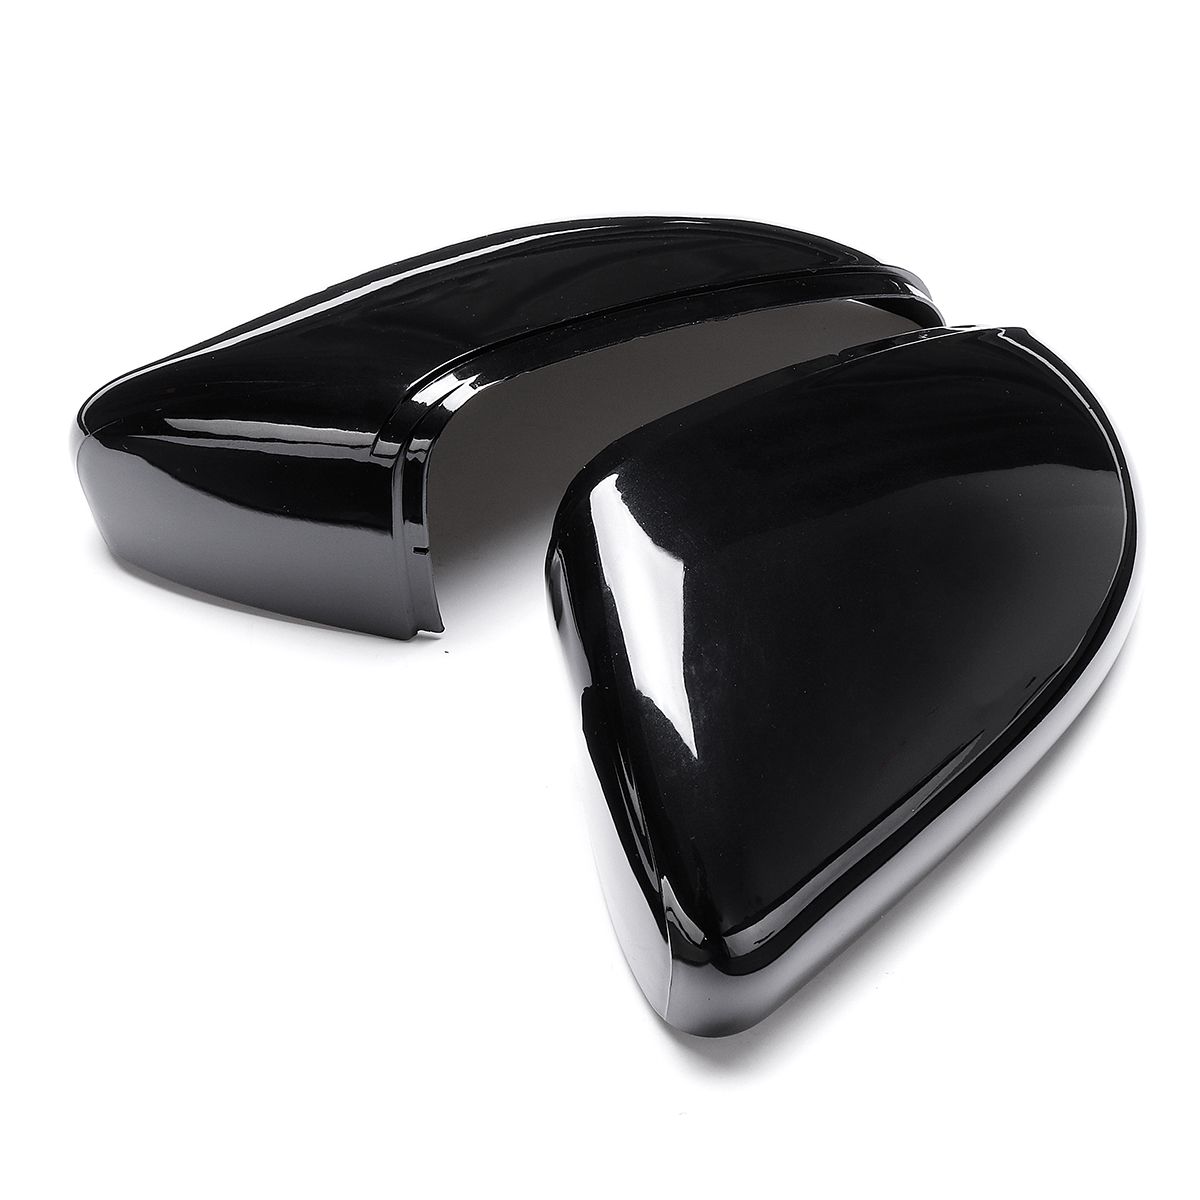 Pair-Front-Wing-Side-Car-Mirror-Cover-Housing-Cap-Black-For-VW-Golf-MK6-Touran-09-15-1396026